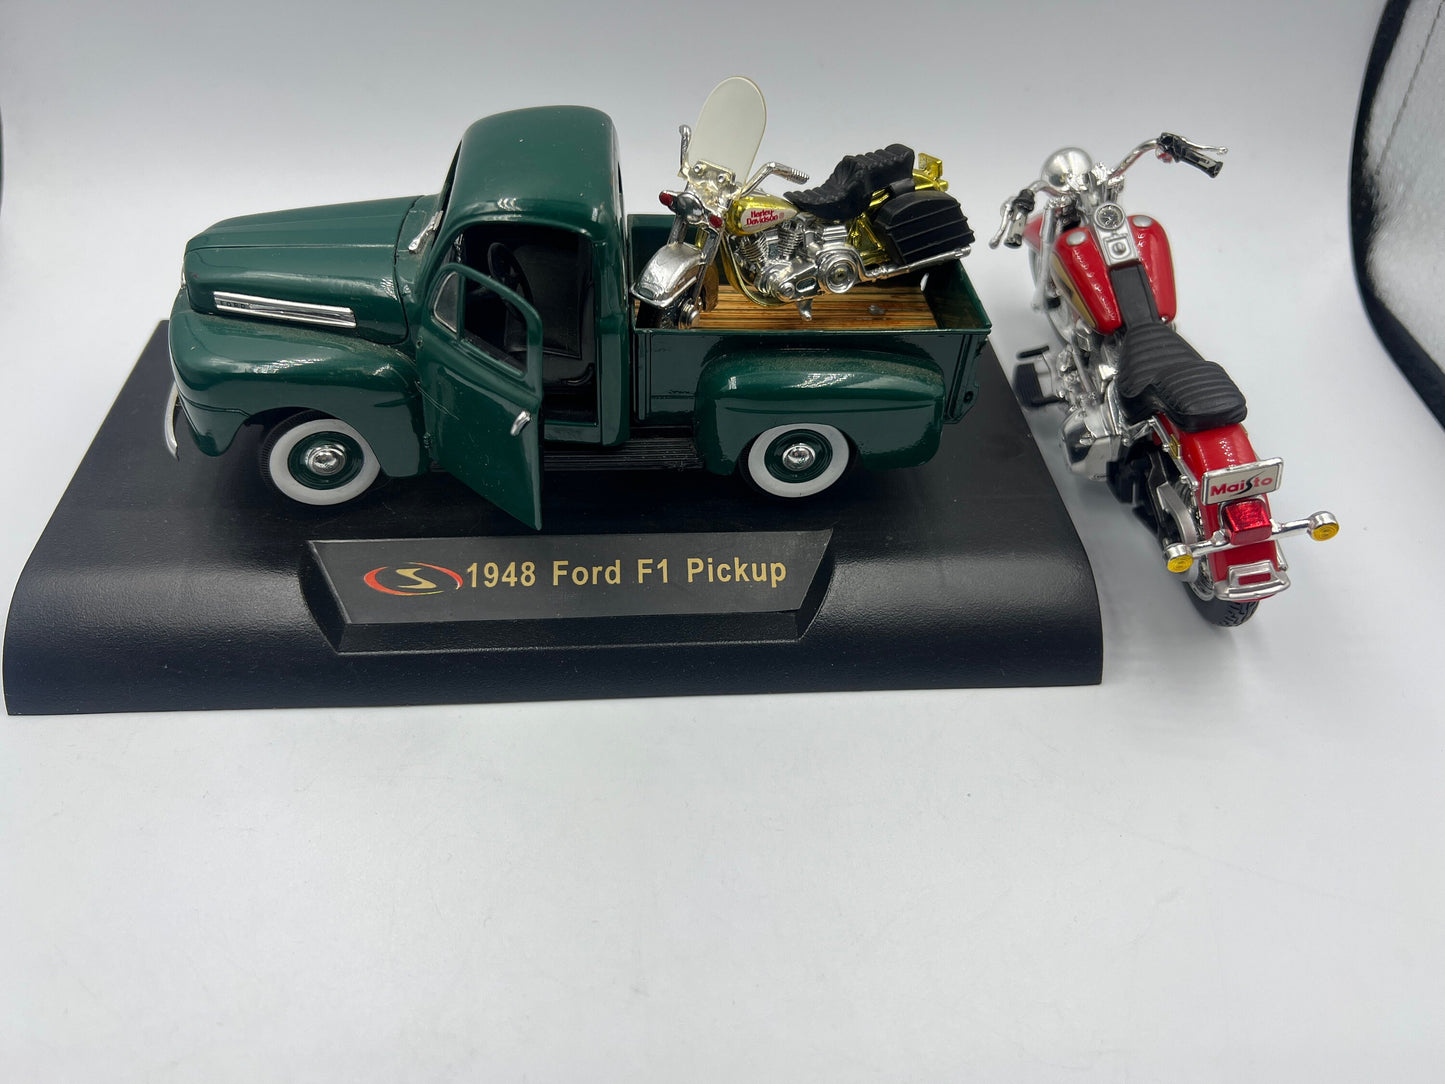 1948 Ford F1 Model Pick Up truck, Harley Davidson Heritage Softtail  1:18 diecast, and Reduced model Harley Davidson Sportster 1 by34